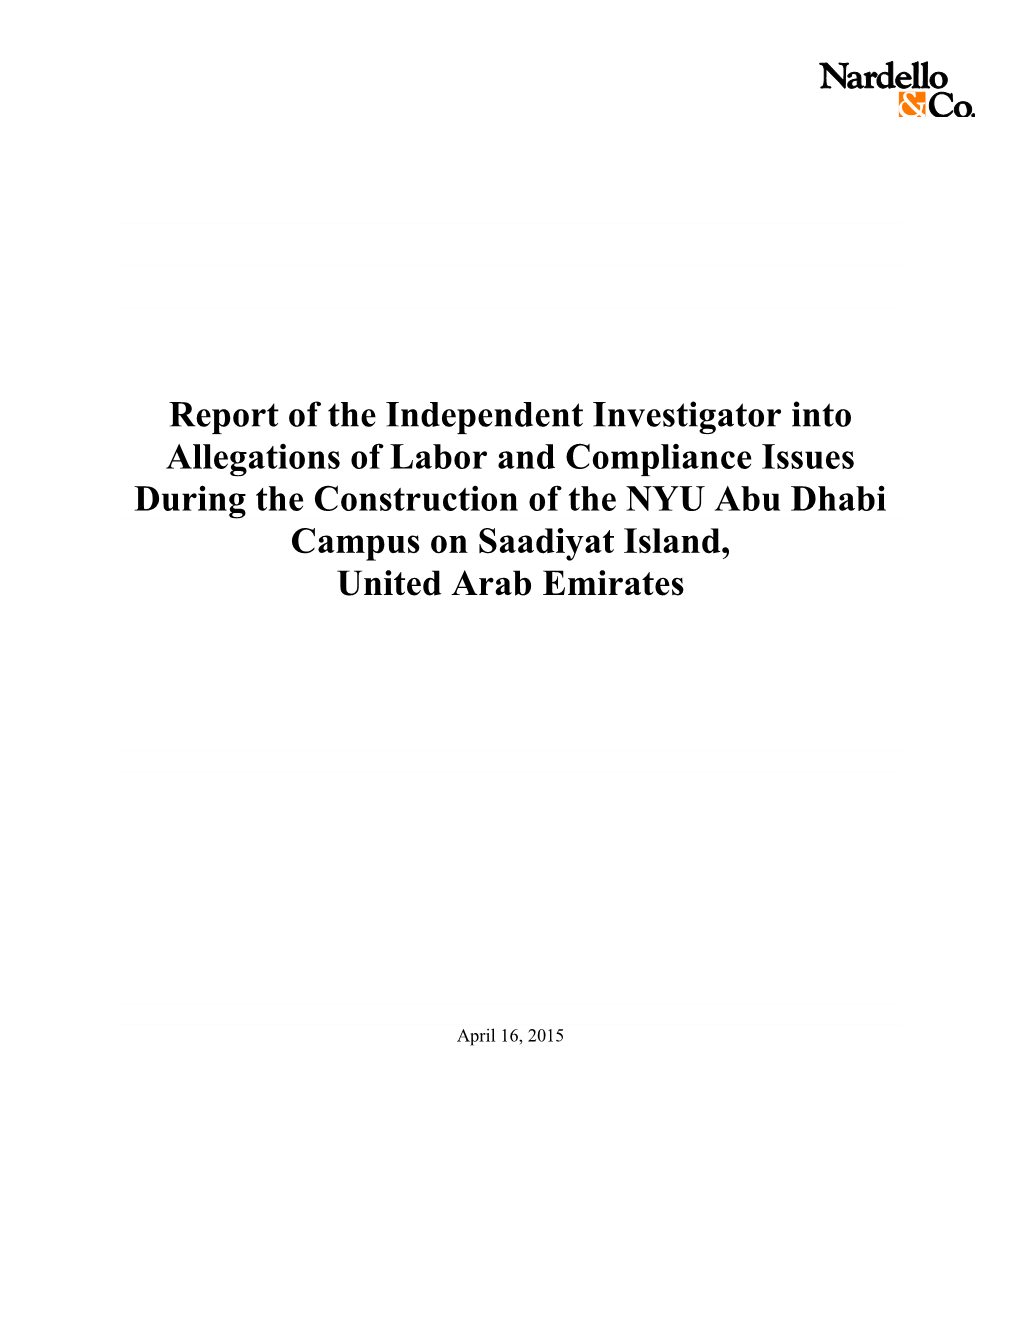 Report of the Independent Investigator Into Allegations of Labor And